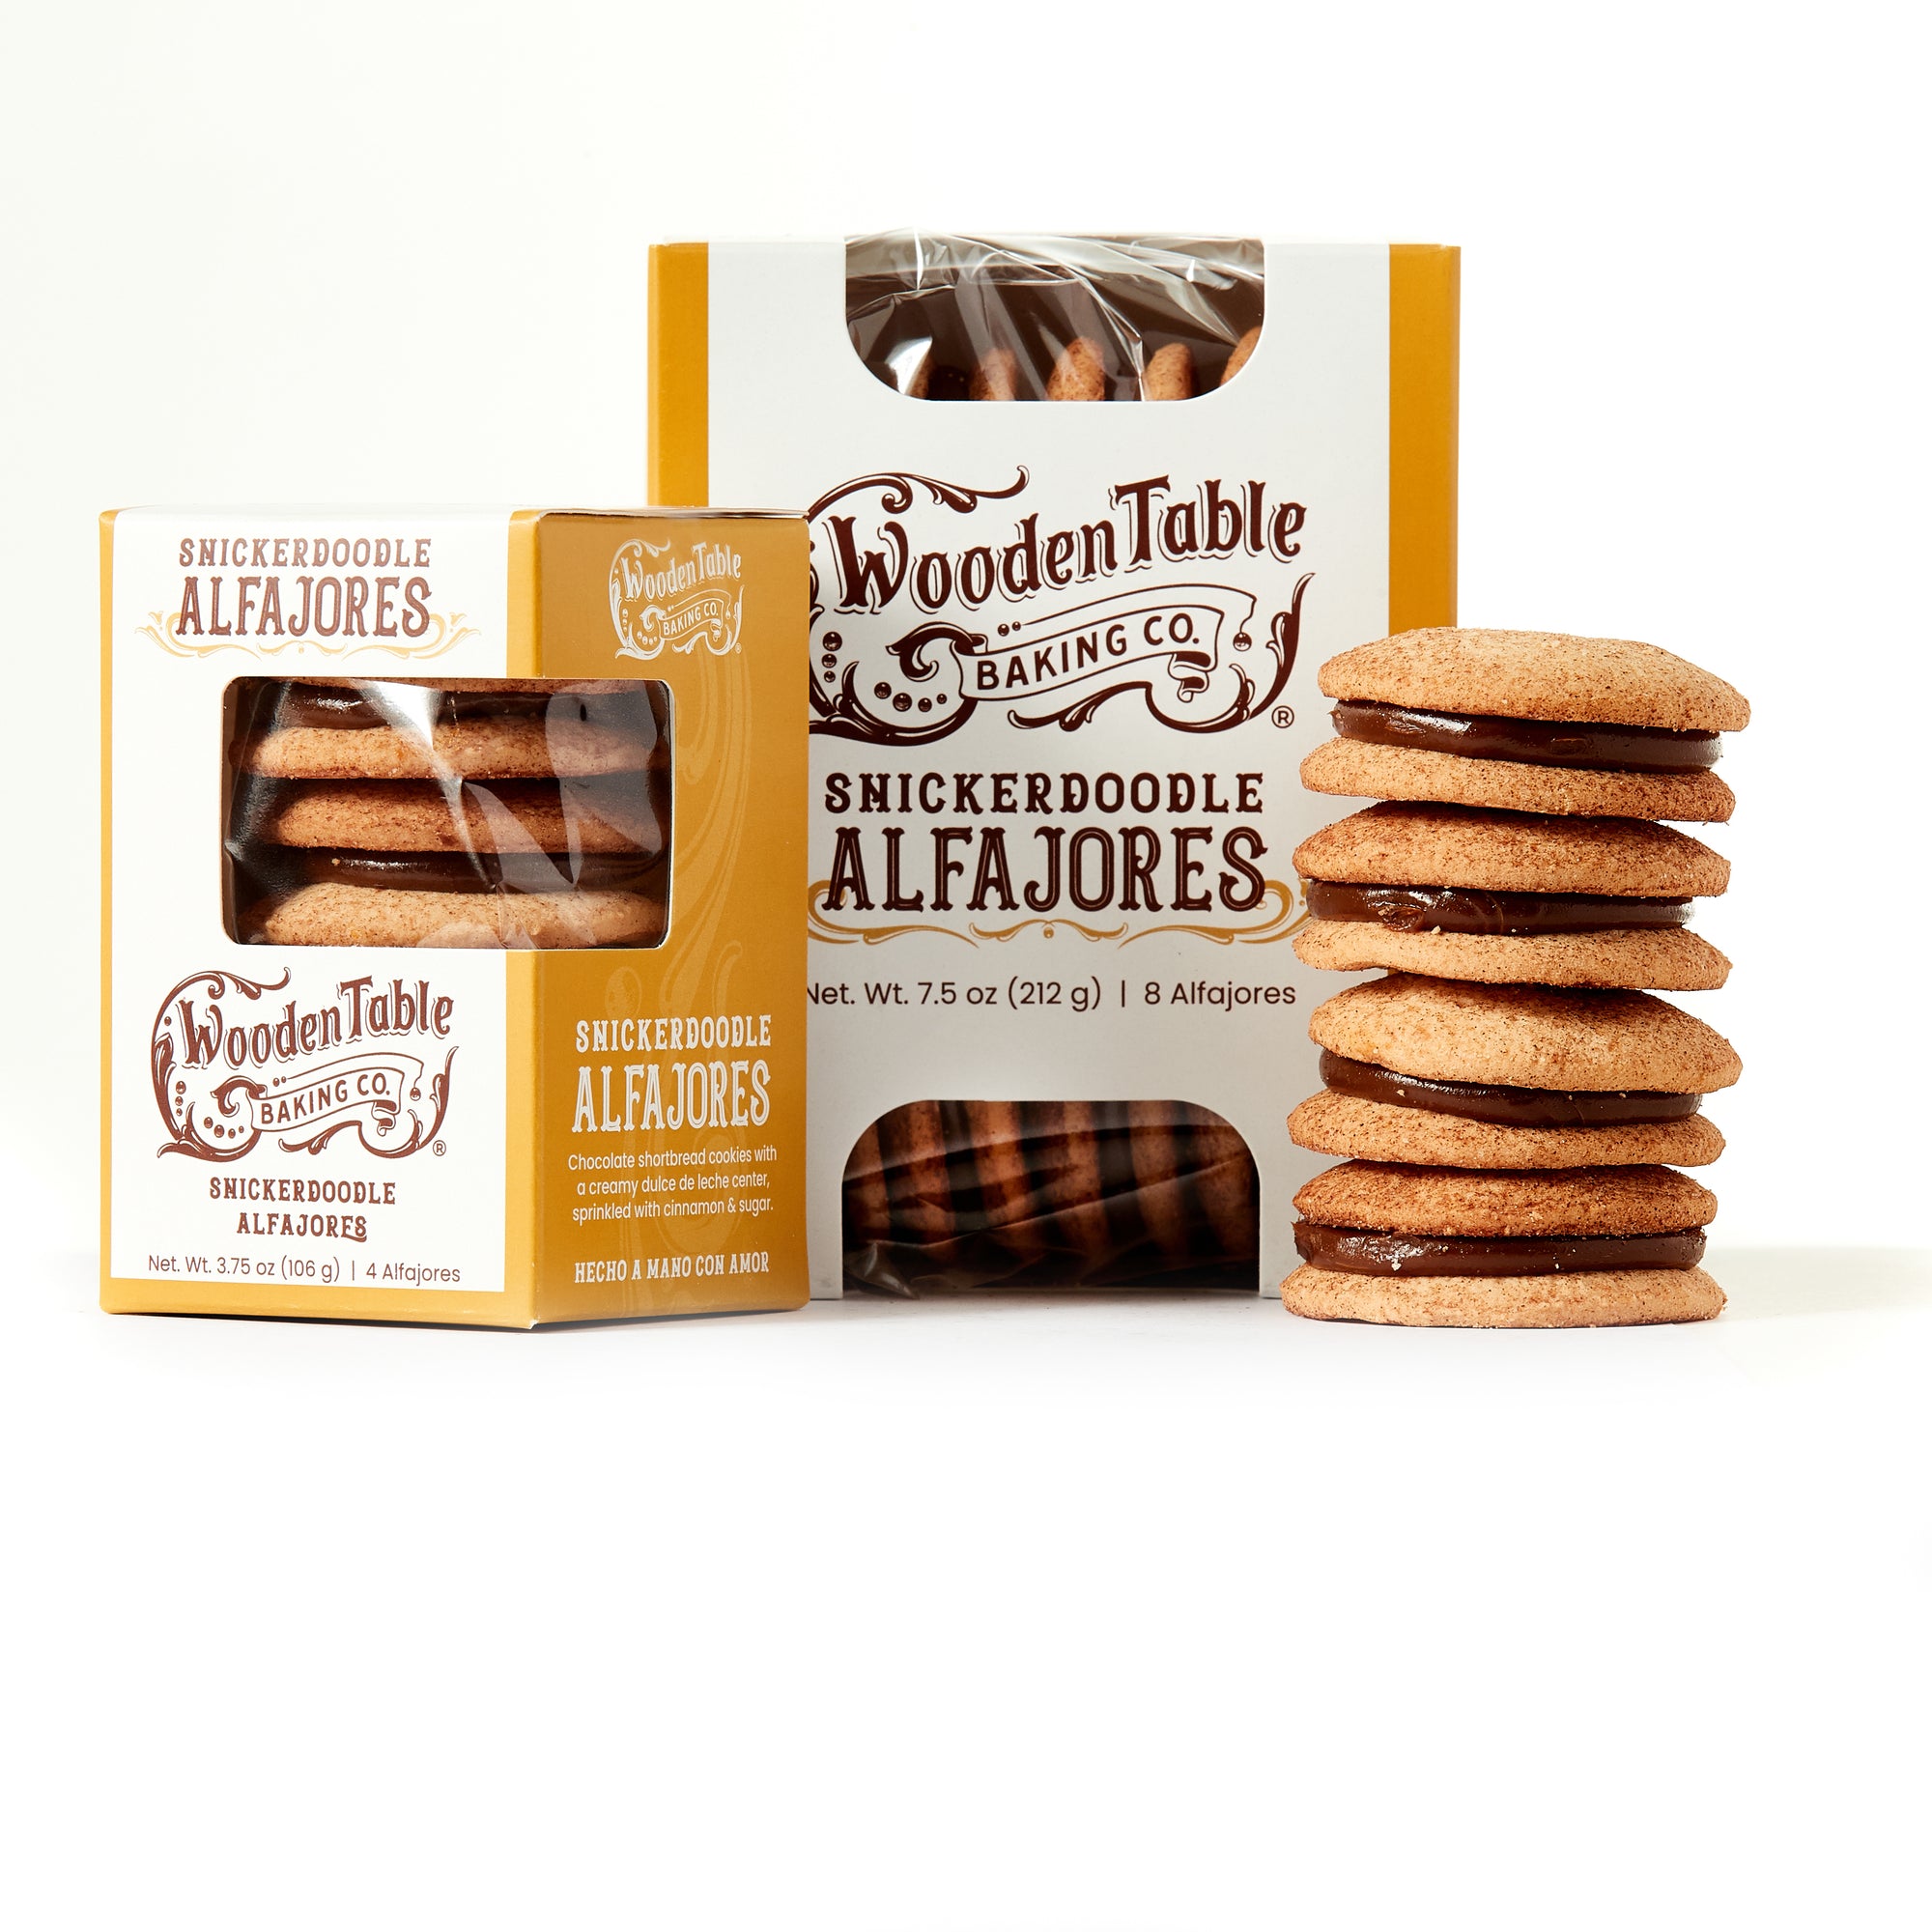  4 Snickerdoodle Alfajores in Packaging from  The Wooden Table Baking Company